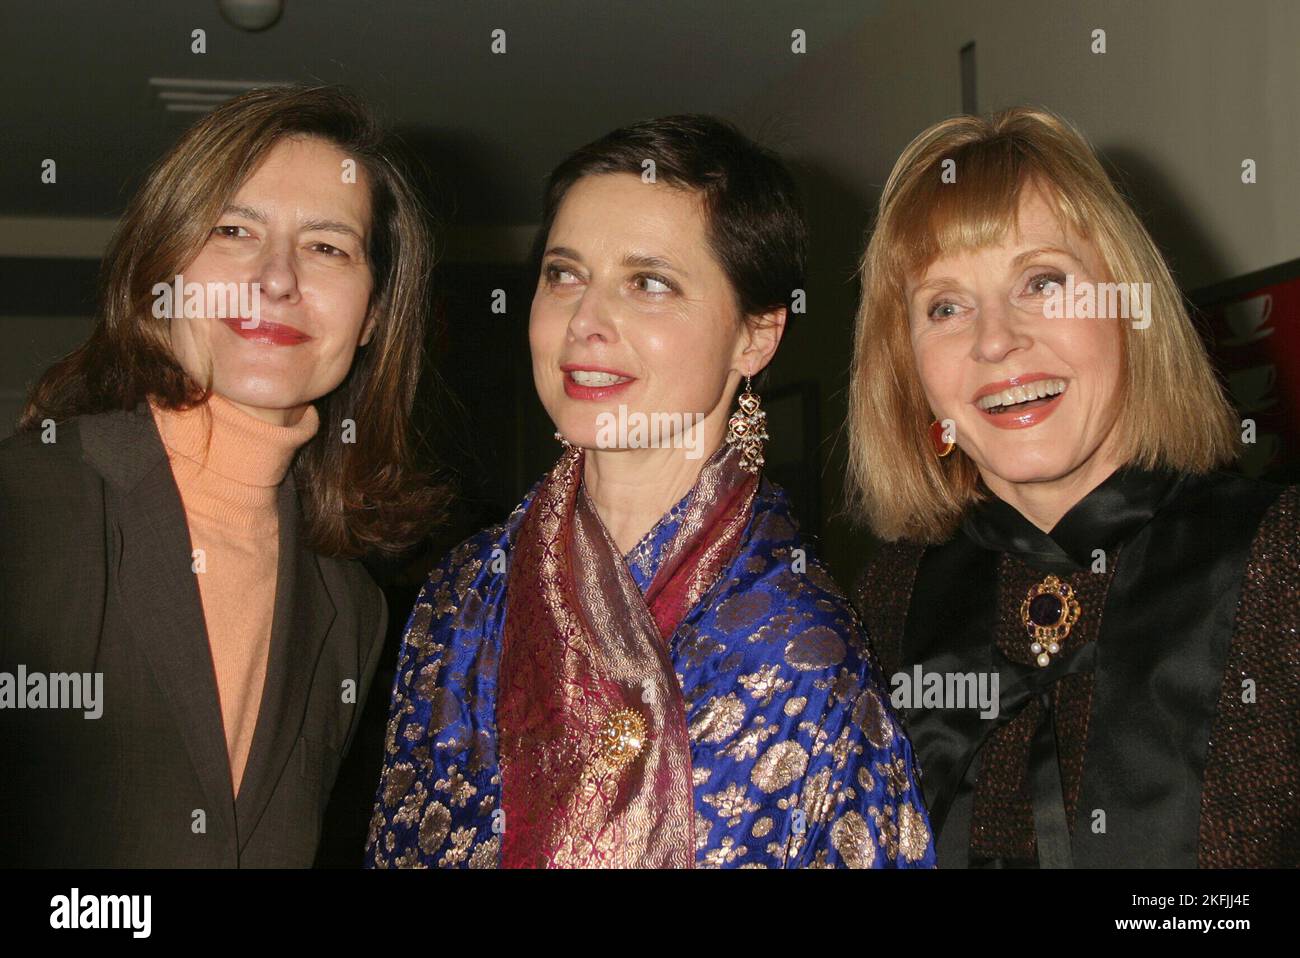 Ingrid Rossellini, Isabella Rossellini and Pia Lindstrom attend the opening night party for 'The Stendhal Syndrome' at Fred's at Barney's in New York City on February 15, 2004.  Photo Credit: Henry McGee/MediaPunch Stock Photo